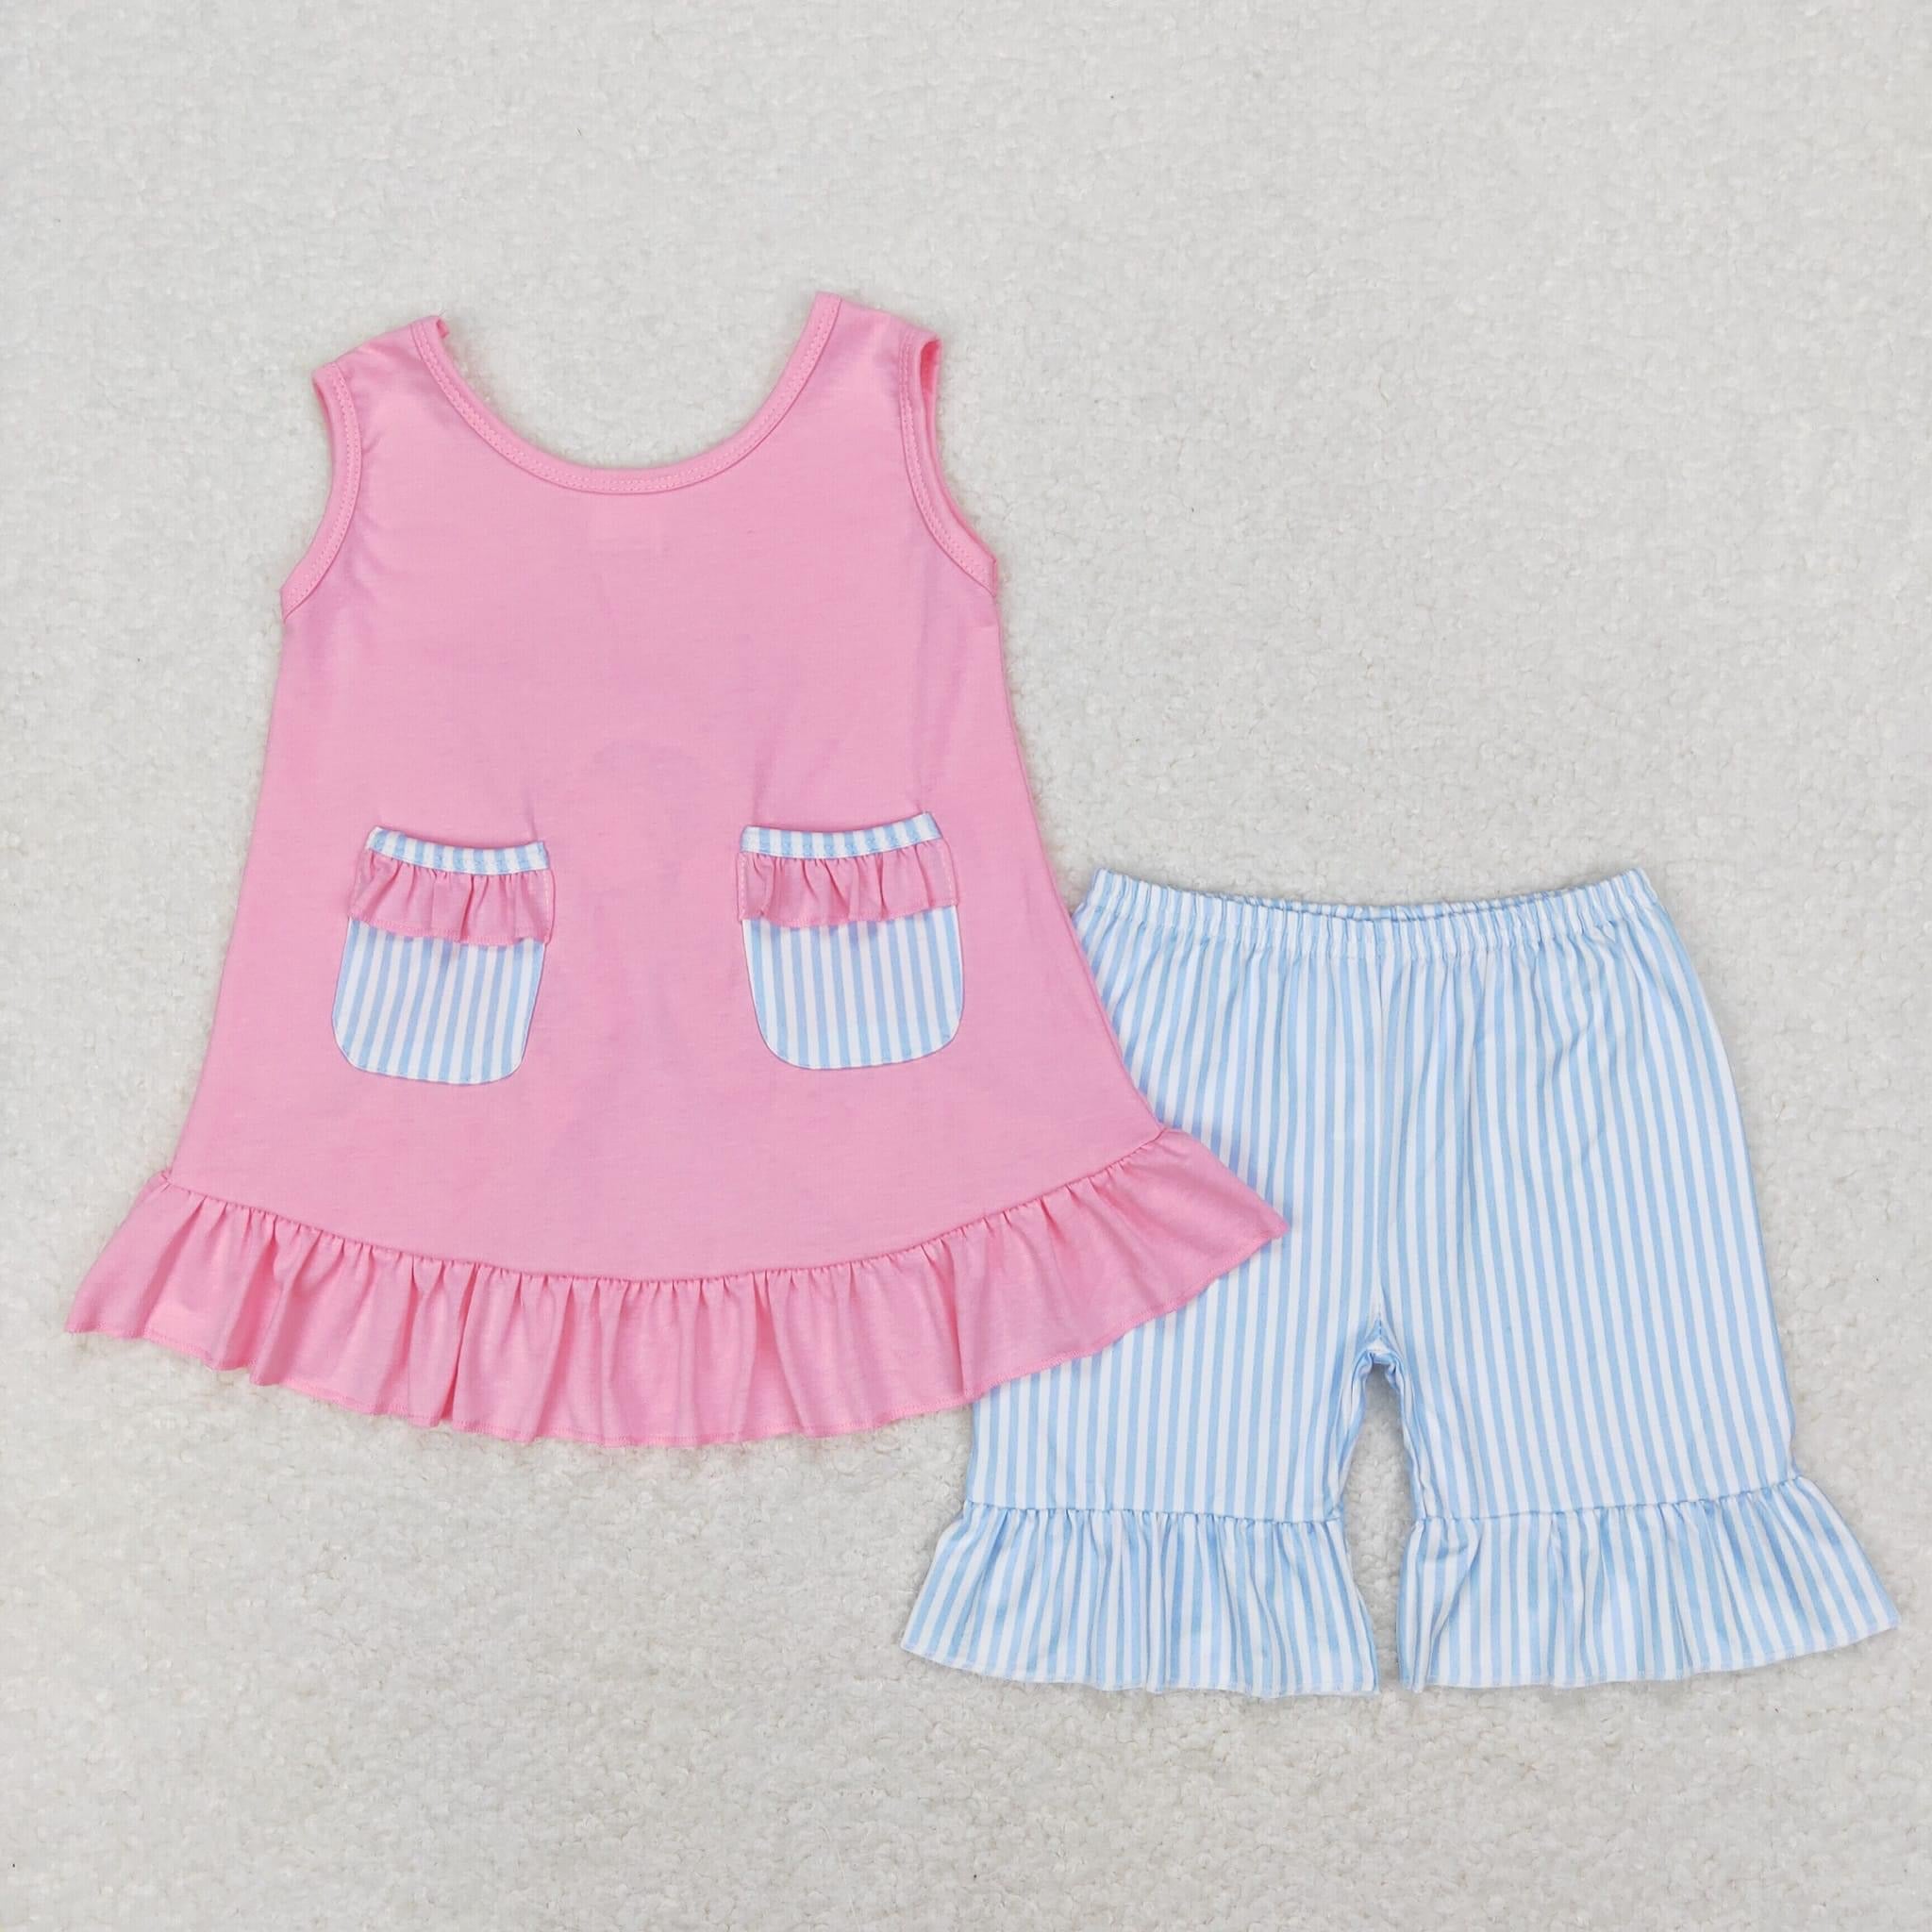 Pink and blue ruffle